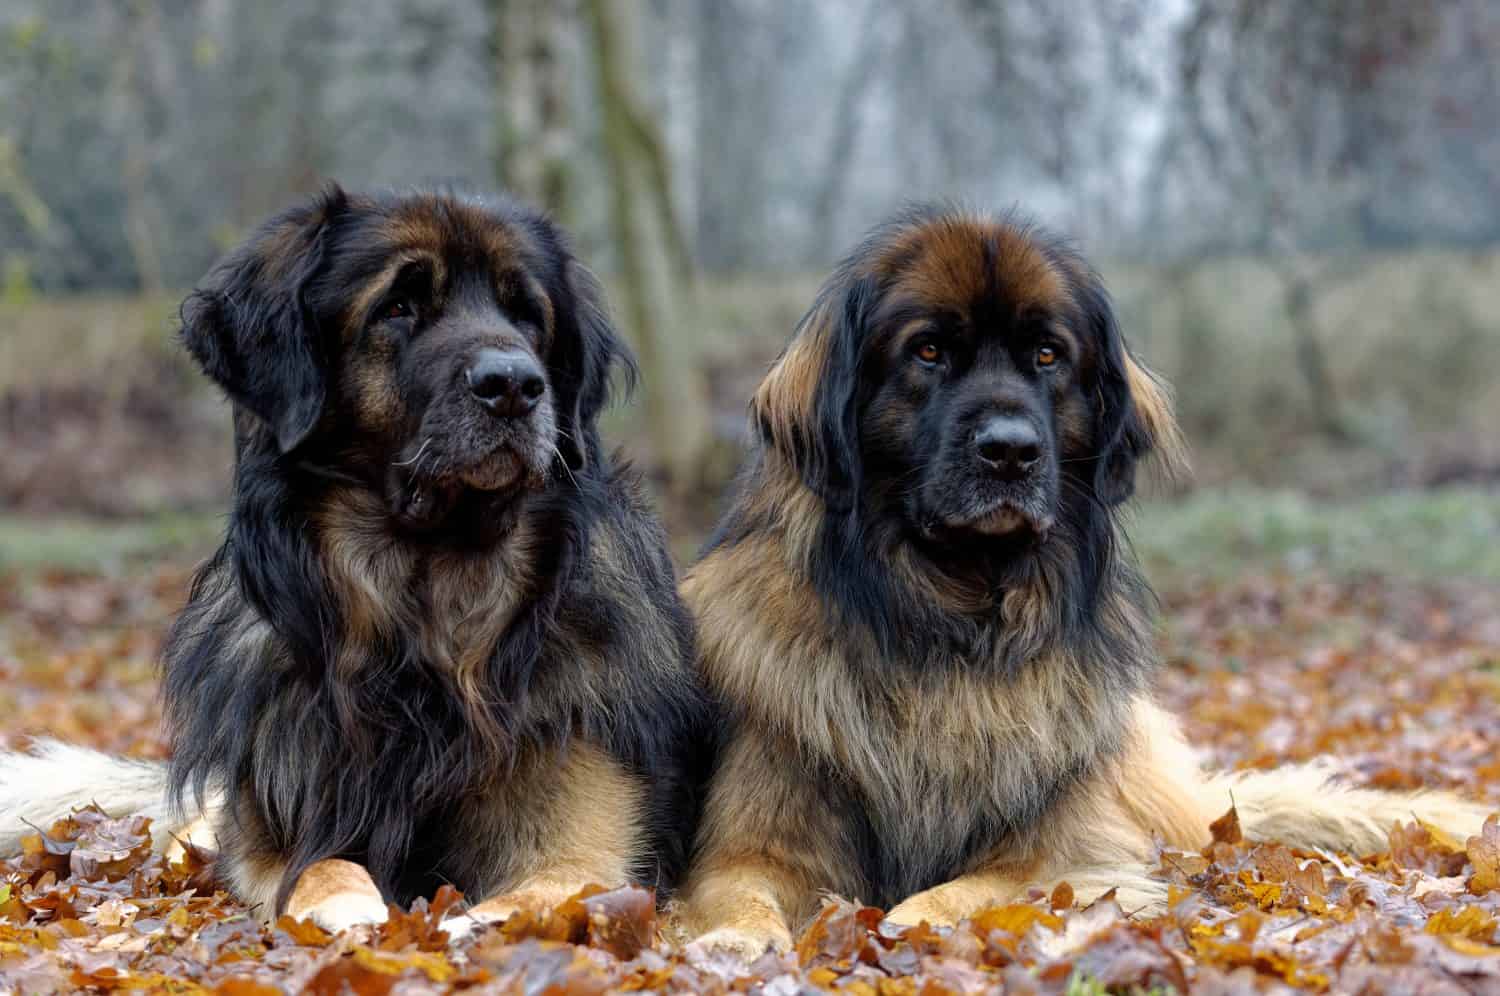 Leonberger. Adult dog and  bitch  laid down on fallen leaves close up head portrait.